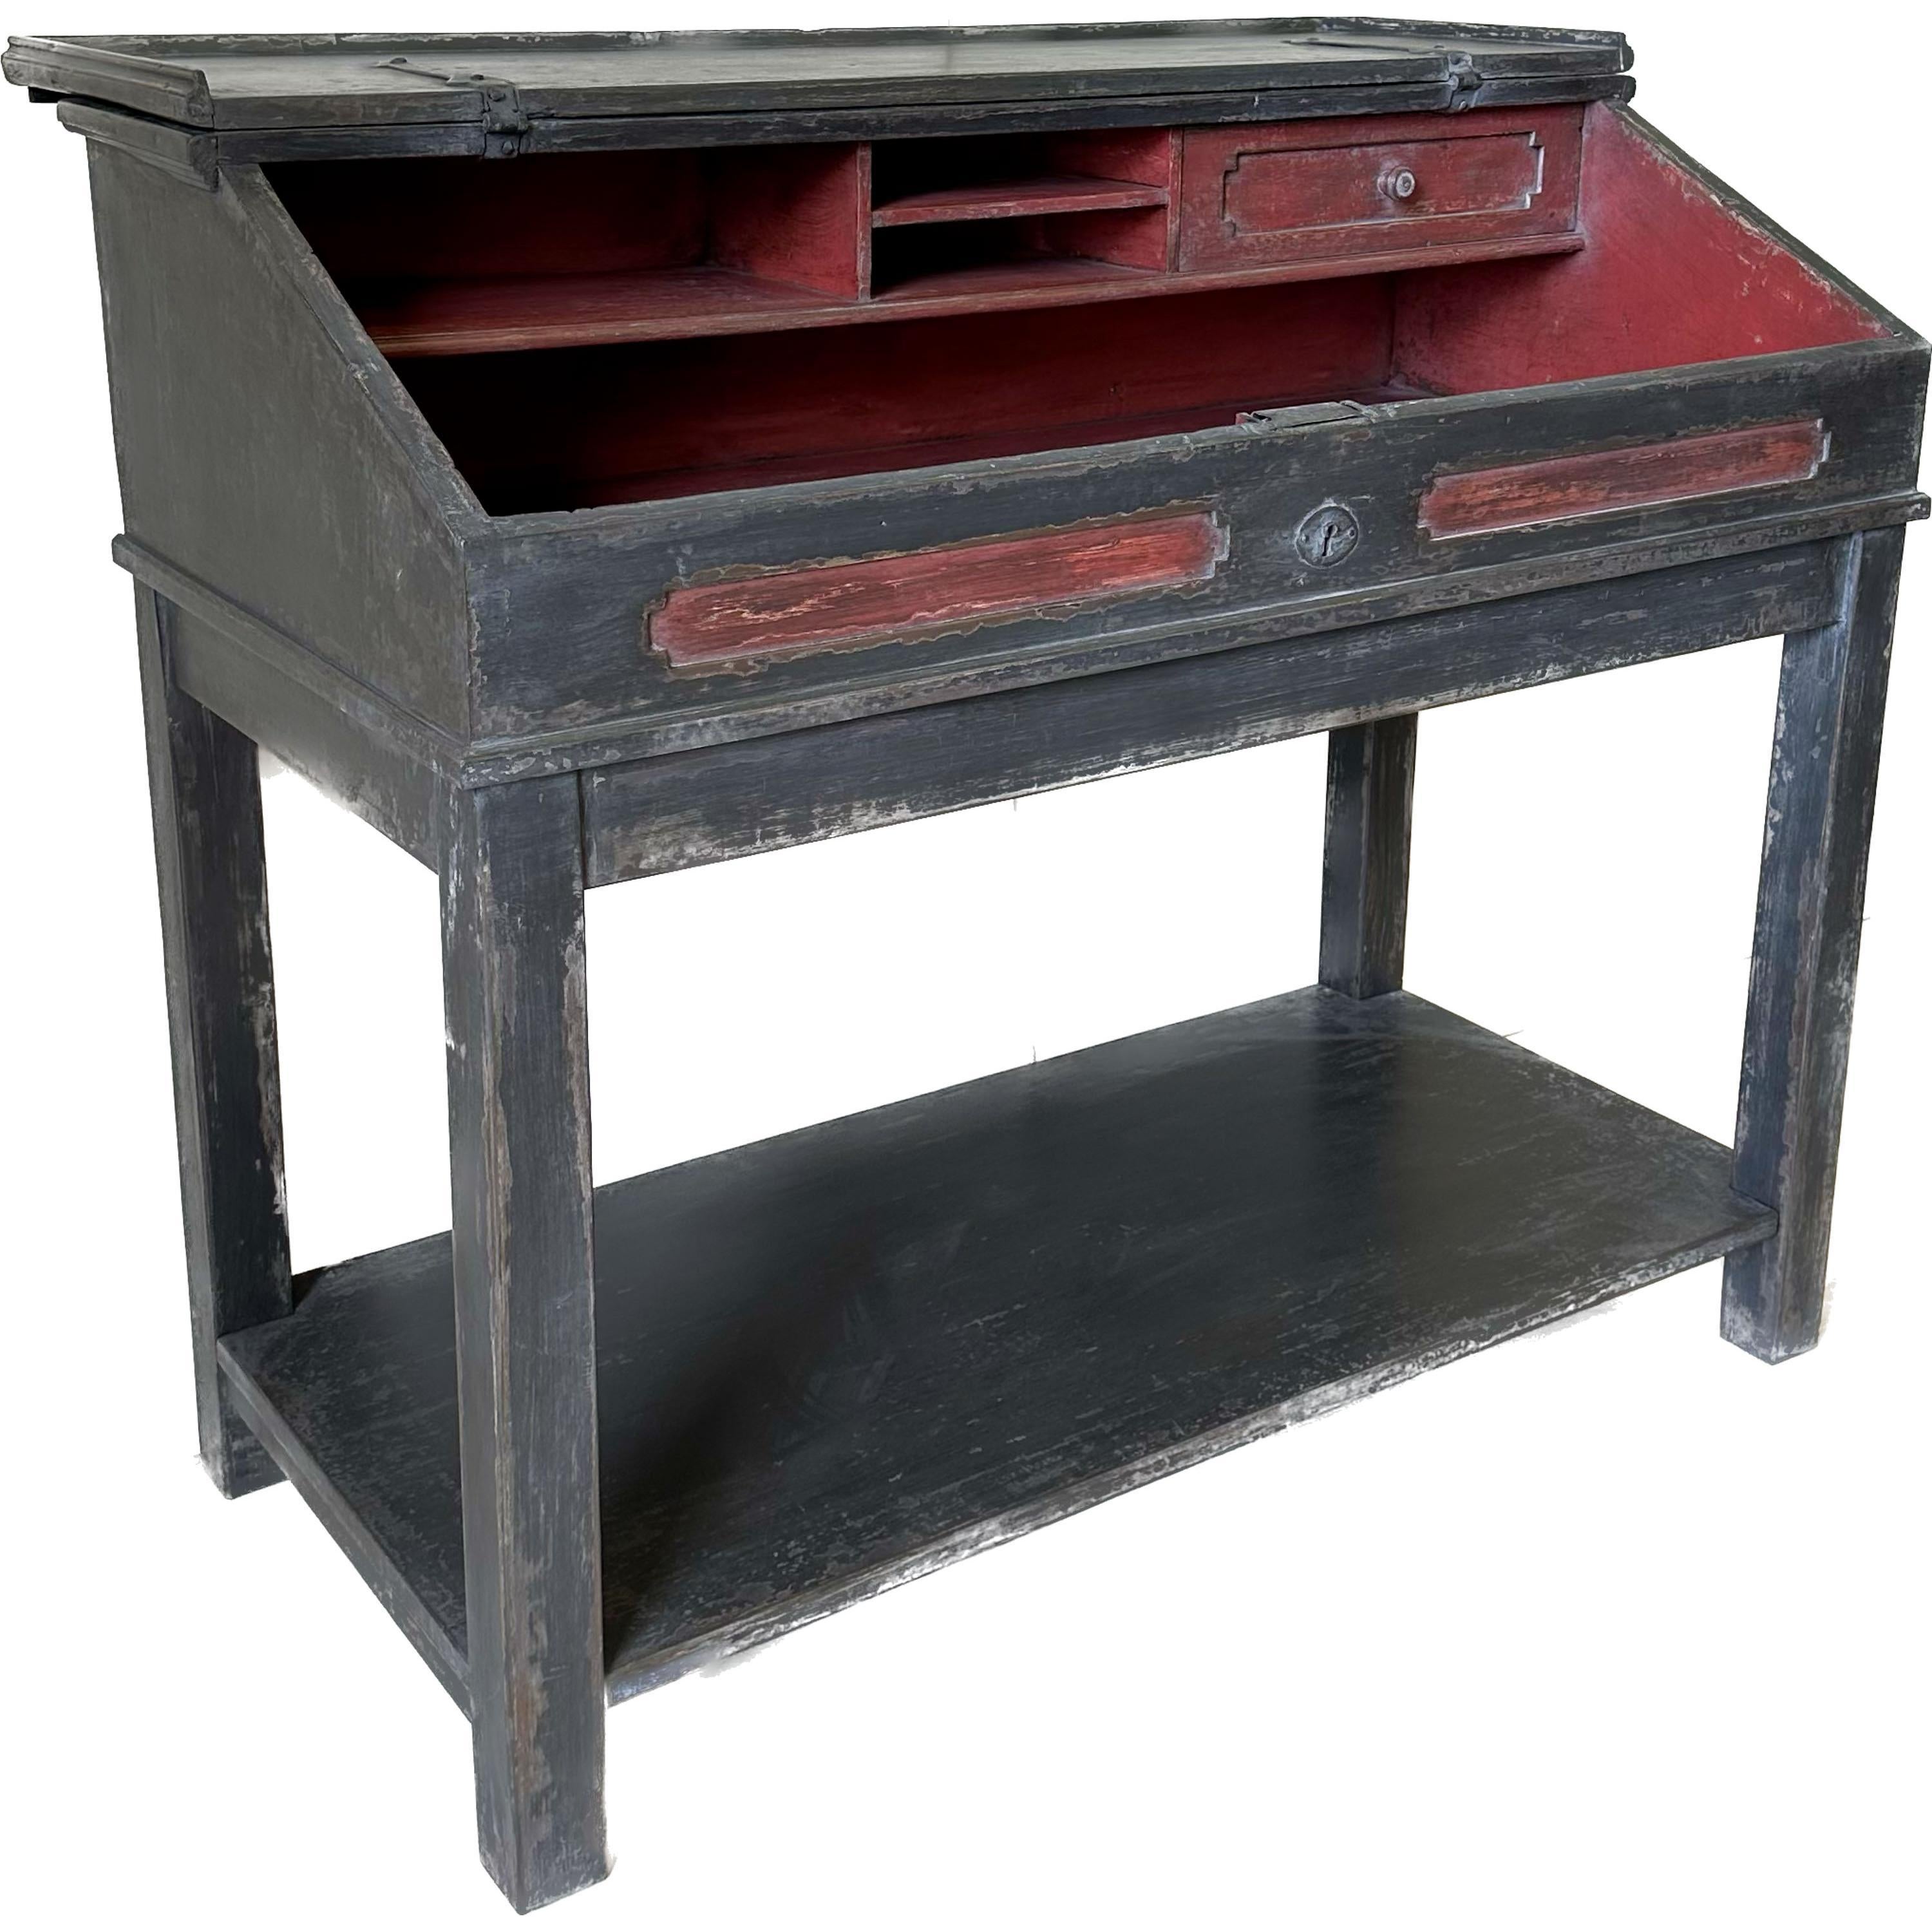 German Lectern-style Desk with hinged Lid, Grey and Red, 19th Century For Sale